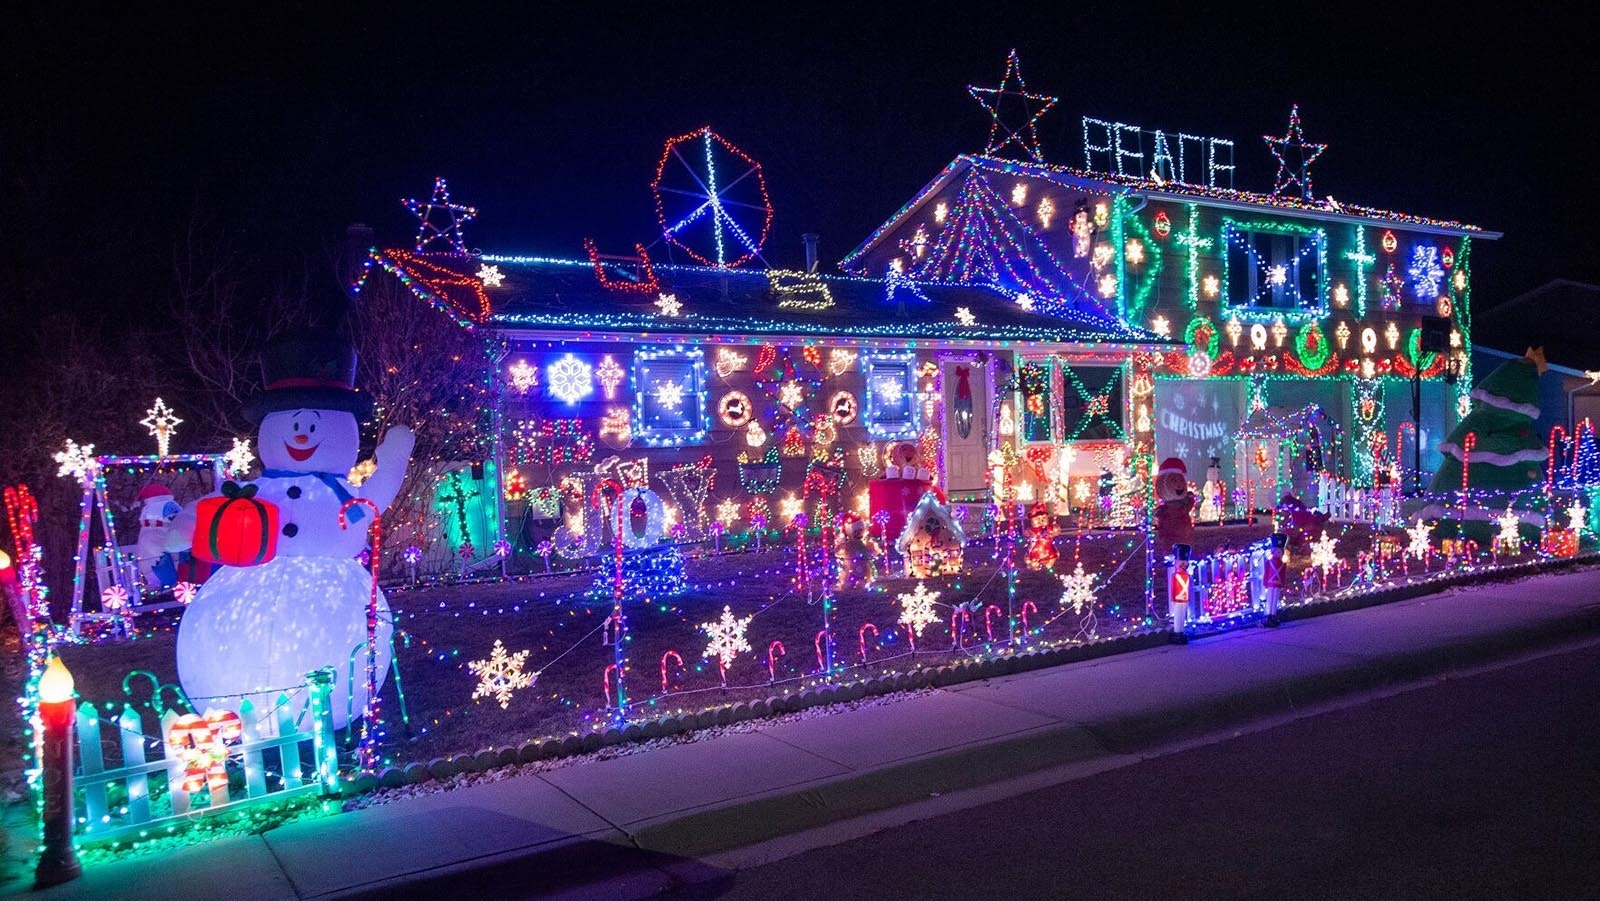 While Ed Lambert said he prefers a clean look to his Christmas decorating, he has no problem with others who like colorful, less structured displays, like this house at 811 Apricot St. in Gillette.